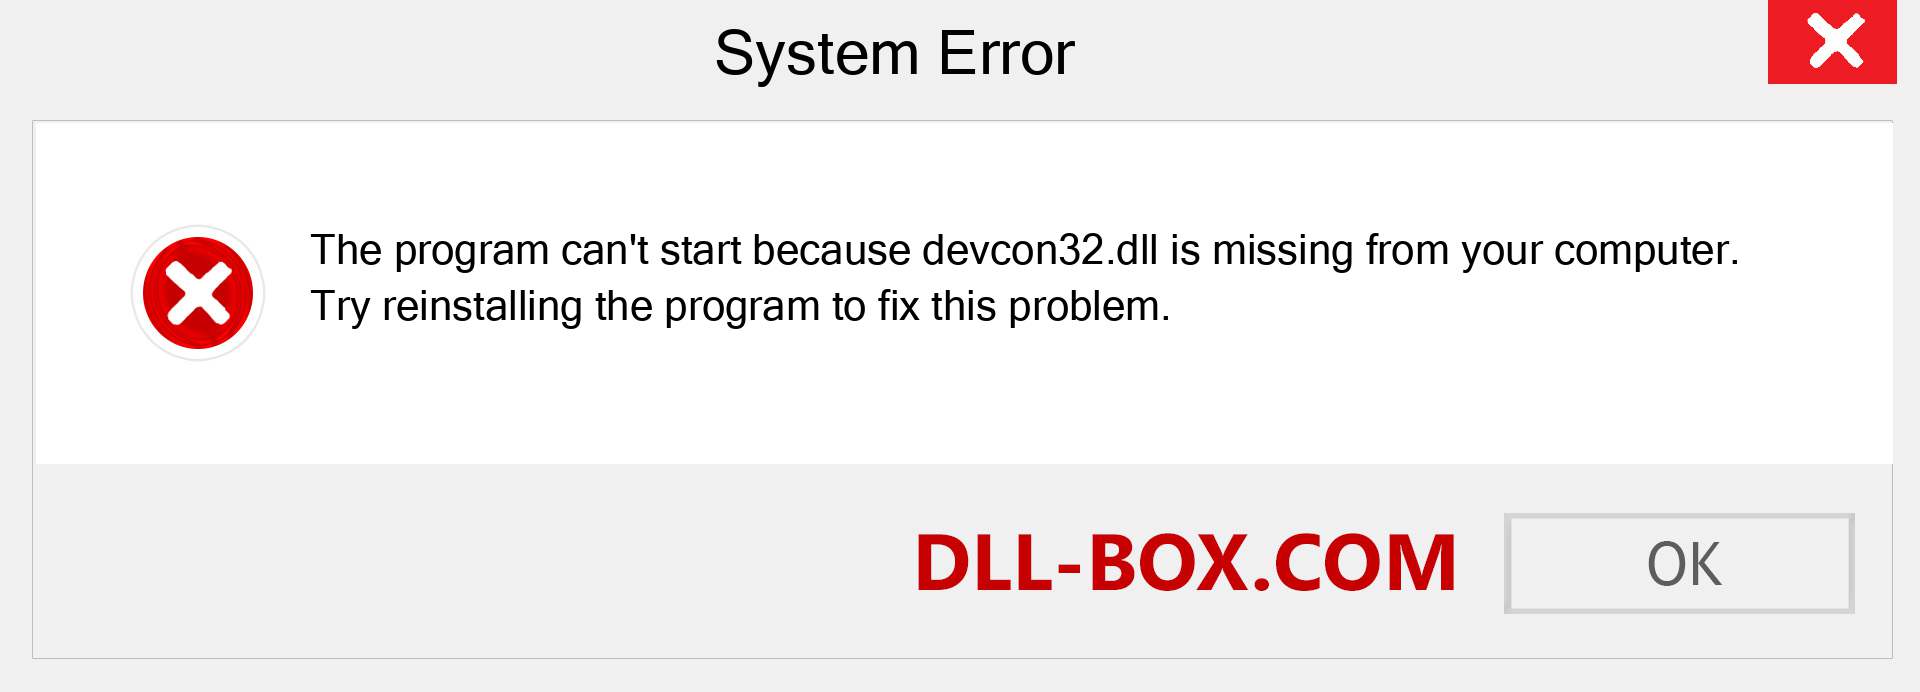  devcon32.dll file is missing?. Download for Windows 7, 8, 10 - Fix  devcon32 dll Missing Error on Windows, photos, images